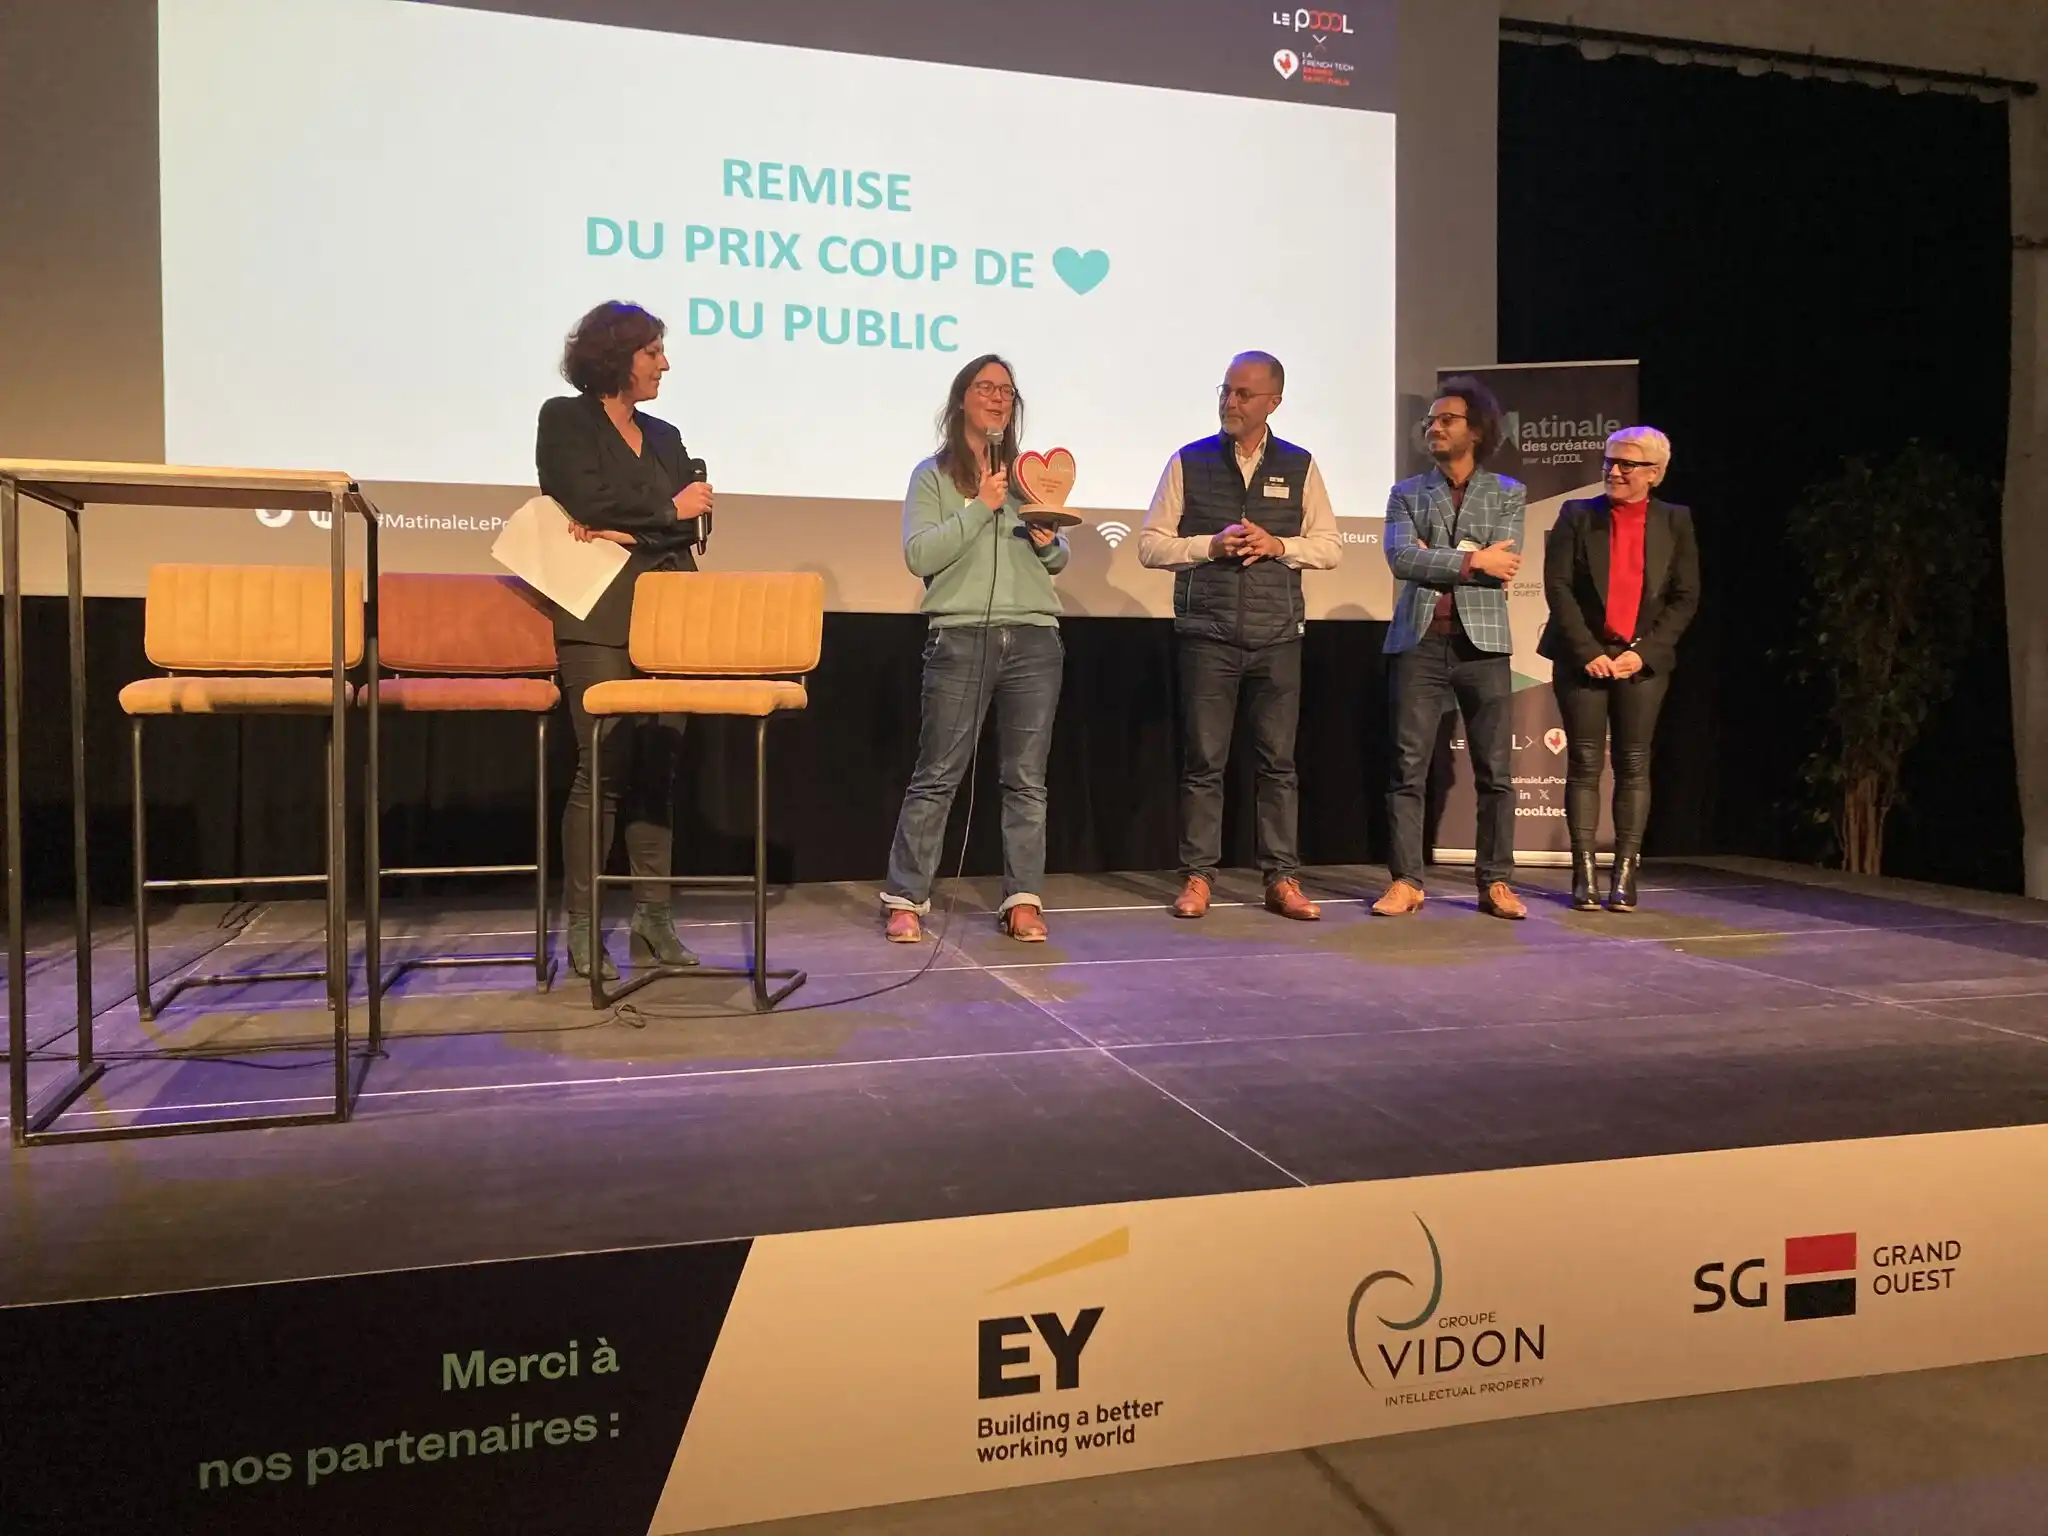 Skyld, the nominated startup, wins the Audience Award at the Rennes Creators' Morning!